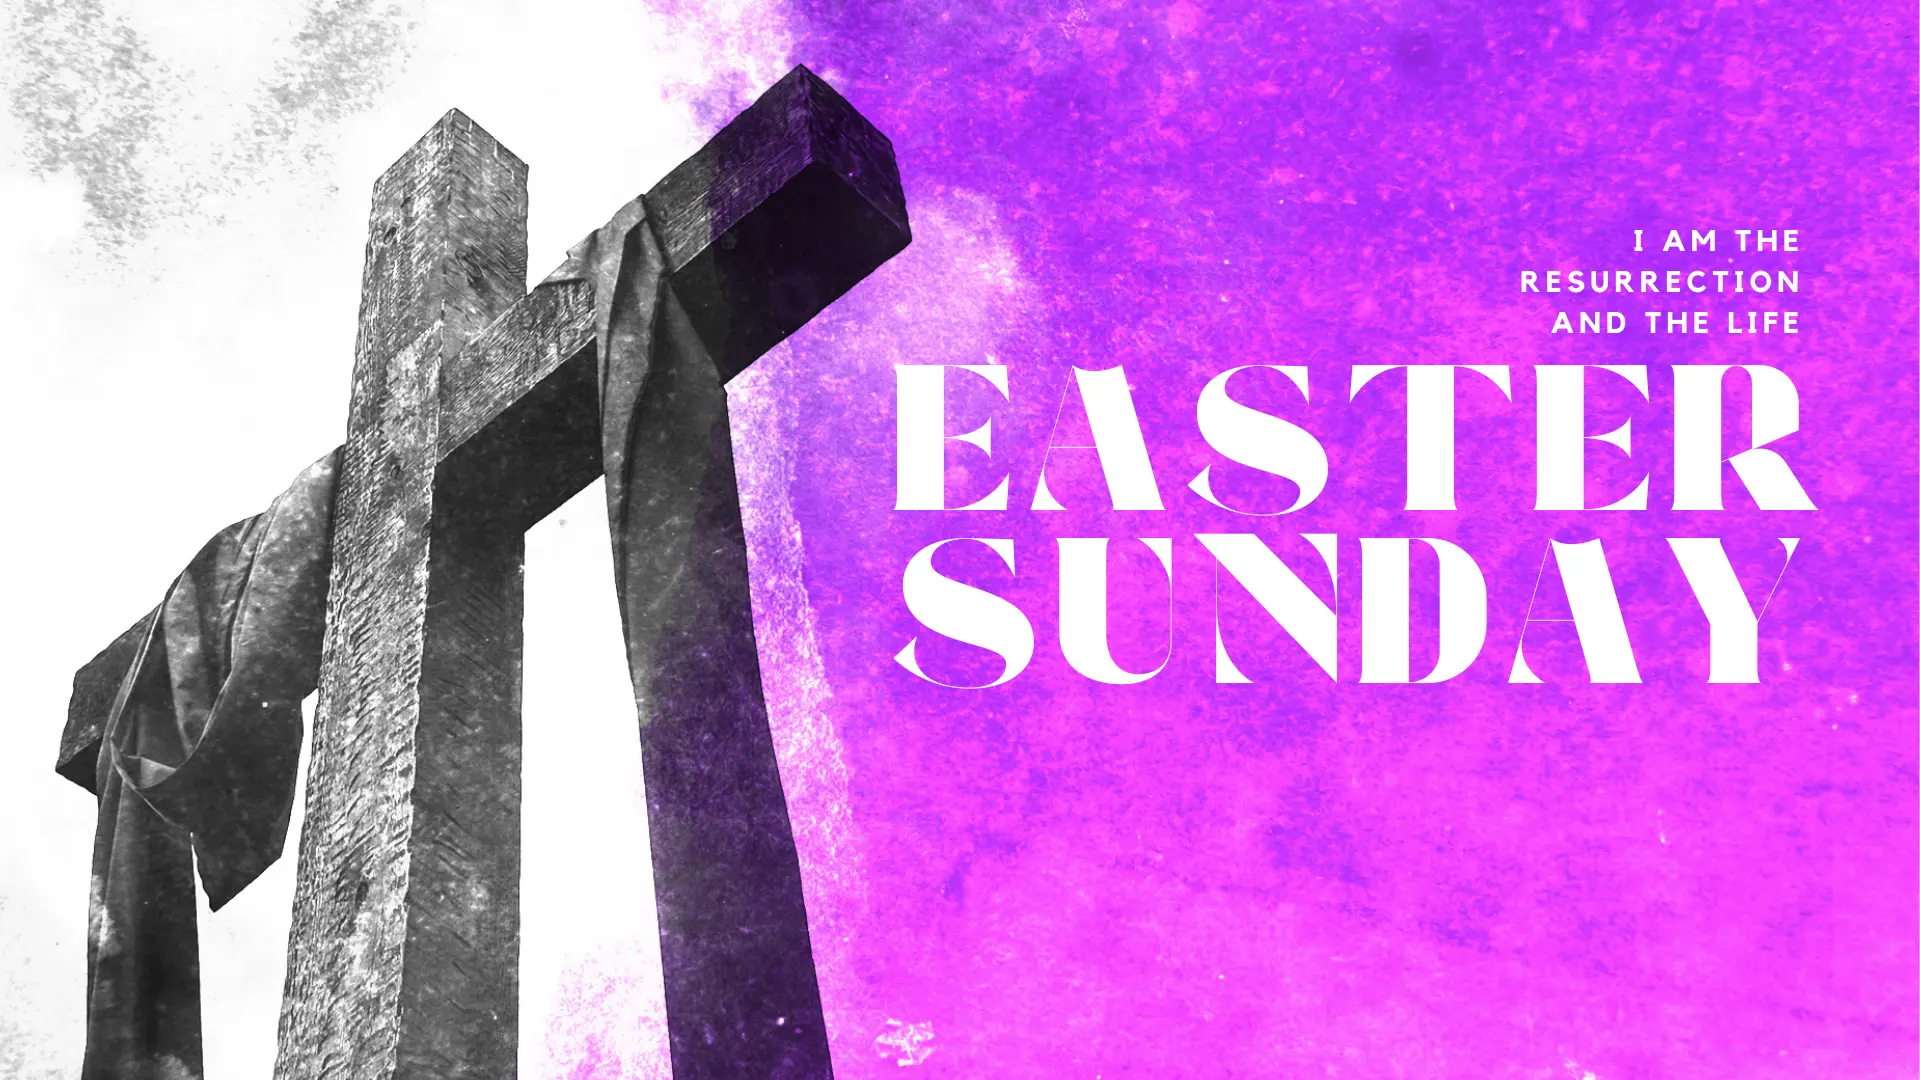 Proclaim The Victory Of Jesus With This &Quot;Easter Sunday&Quot; Graphic That Boldly Declares, &Quot;I Am The Resurrection And The Life.&Quot; The Strong Imagery Of The Cross Against A Vibrant Background Captures The Essence Of The Celebration For Your Church Media.